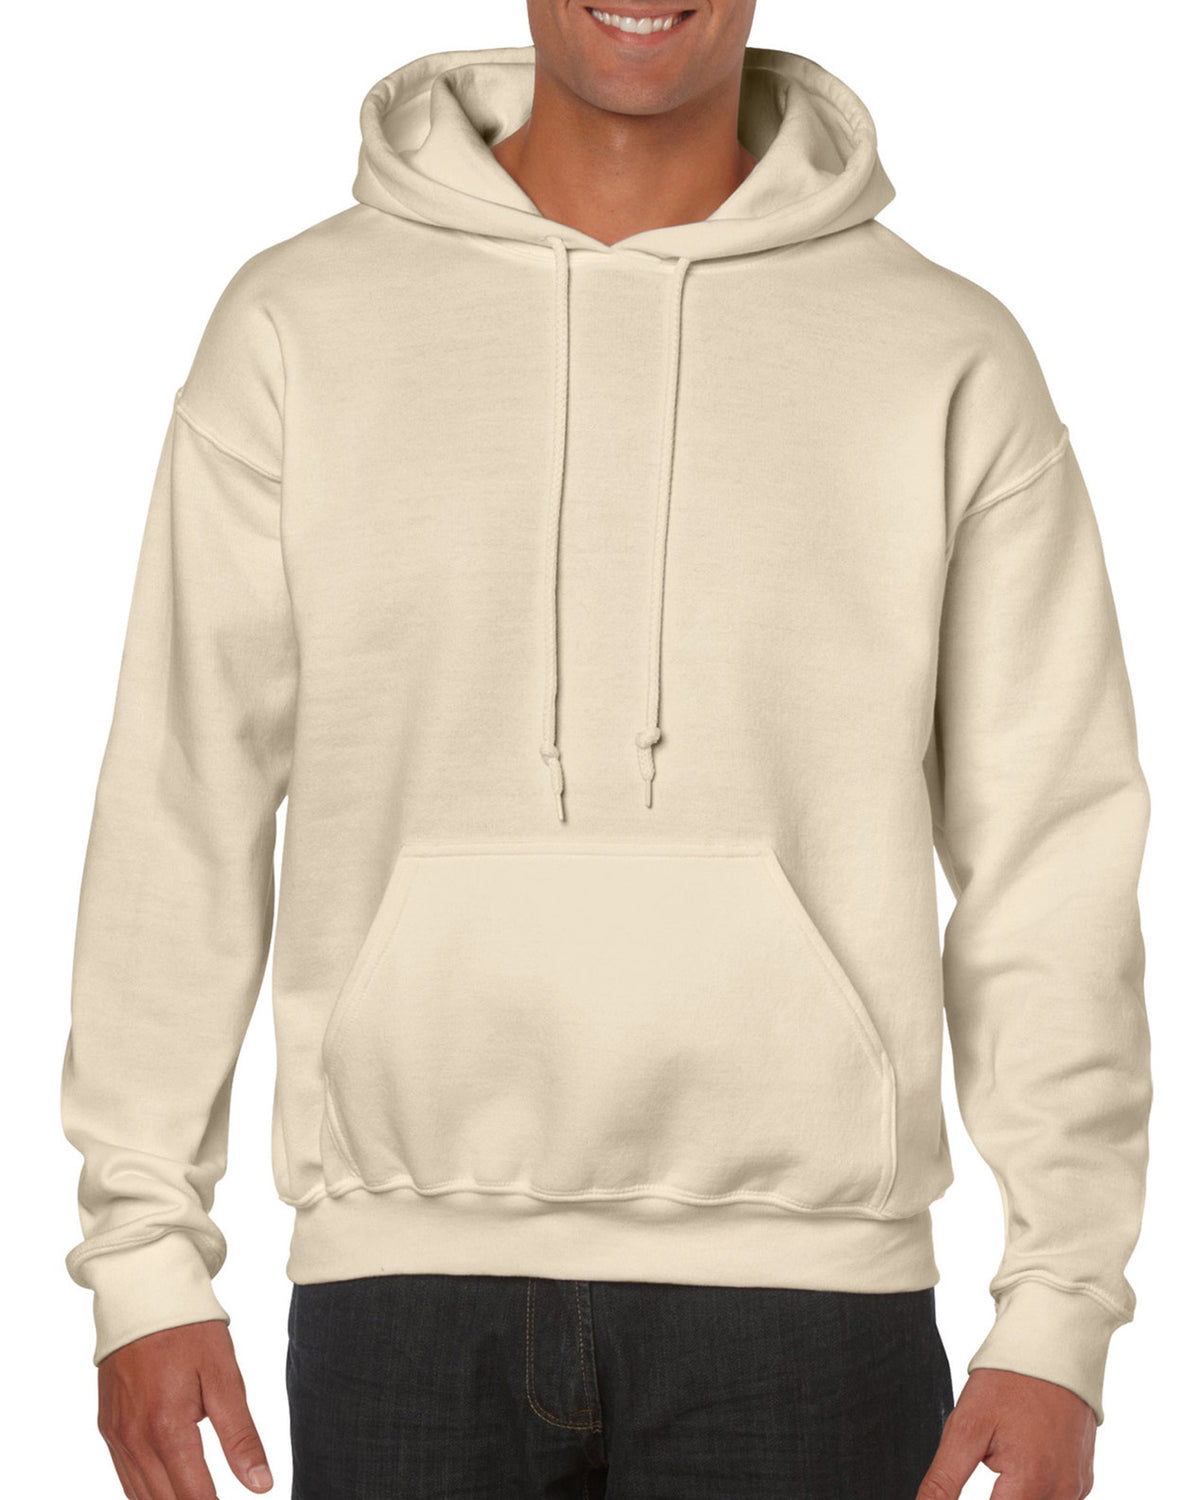 Pullover for Men Hoodie Thick Custom Graphic Printed Hooded Shirt Sweat Men Hoodie  Cotton Hoodies for Men Pullover Mens Medium Sweatshirts Sweatshirts  Pullover Mens Tan Sweatshirt 